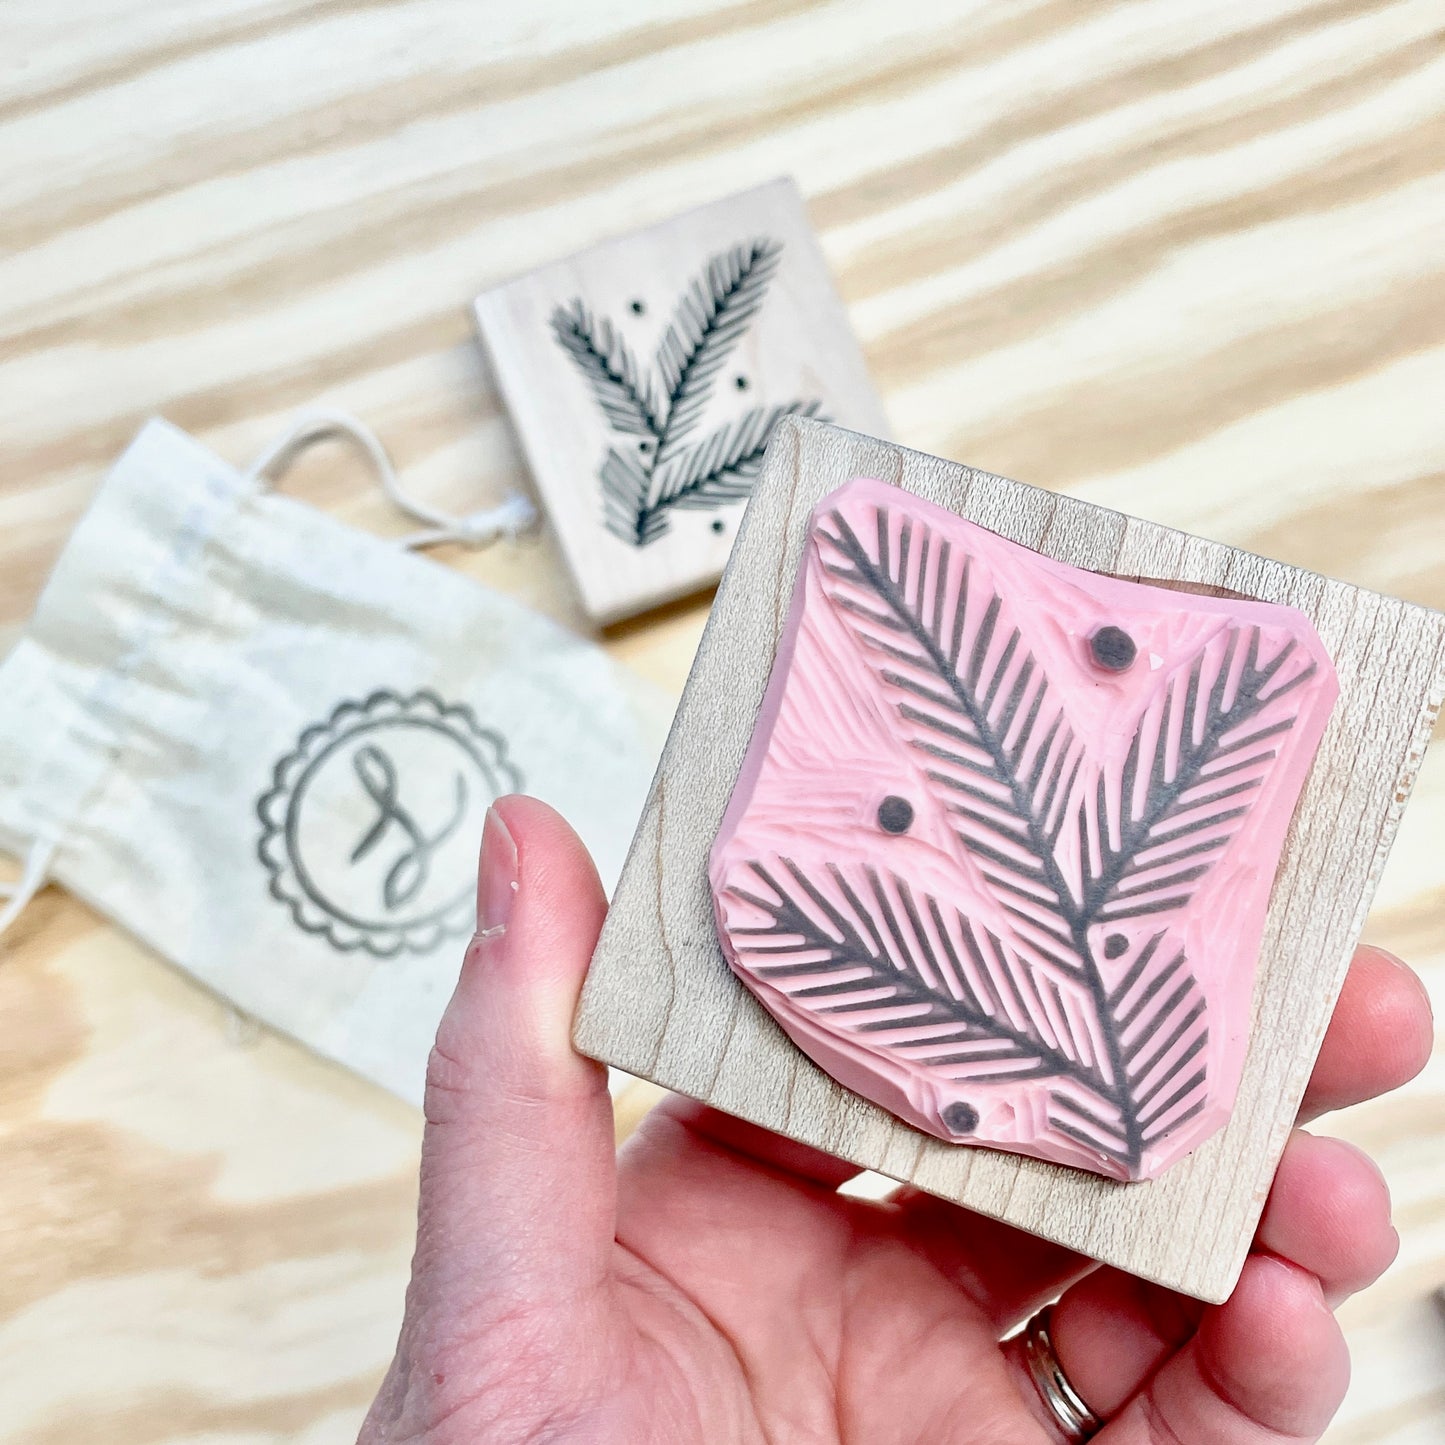 Pine Needles Stamp - Handcarved Rubber Stamp - Wood Mounted 2x2"